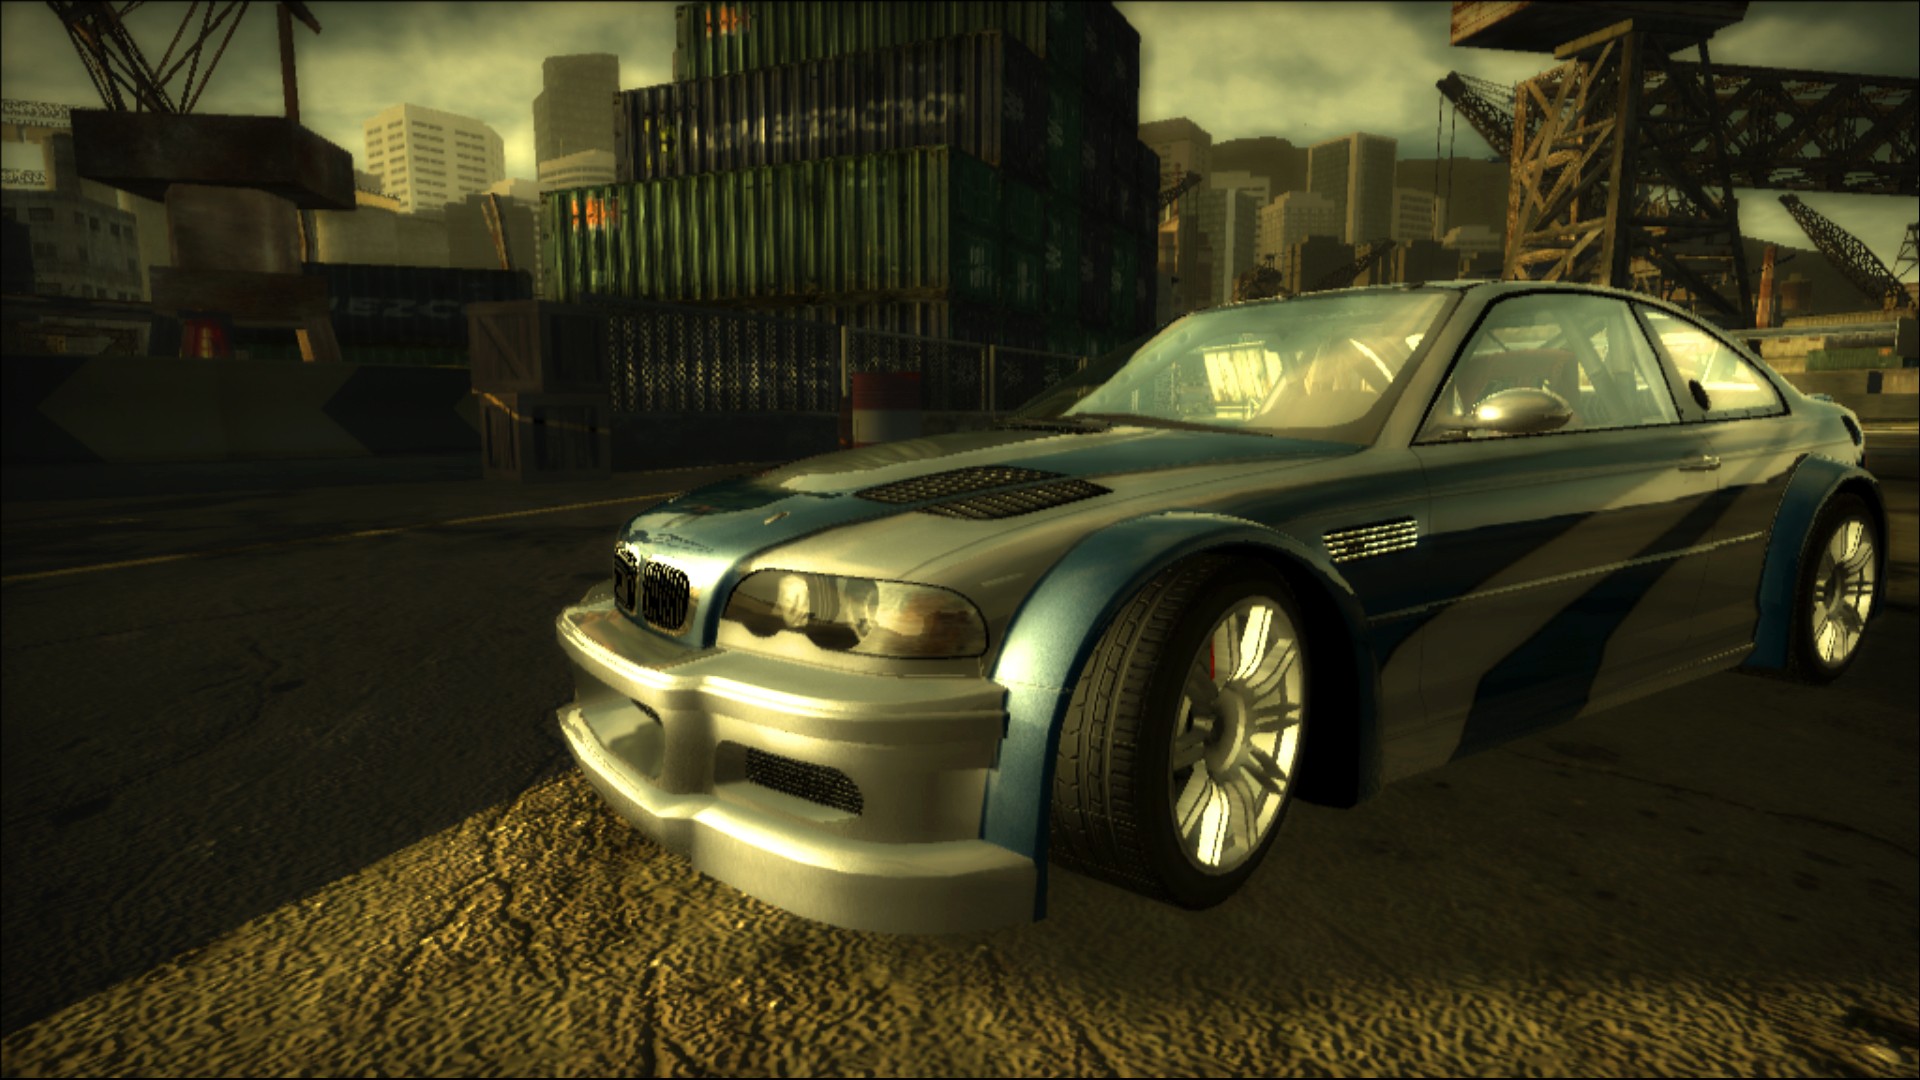 Нед фор спид мост вондет. Игра NFS most wanted 2005. BMW m3 GTR. NFS most wanted 2005 мост. Need for Speed mostwanted 2005.